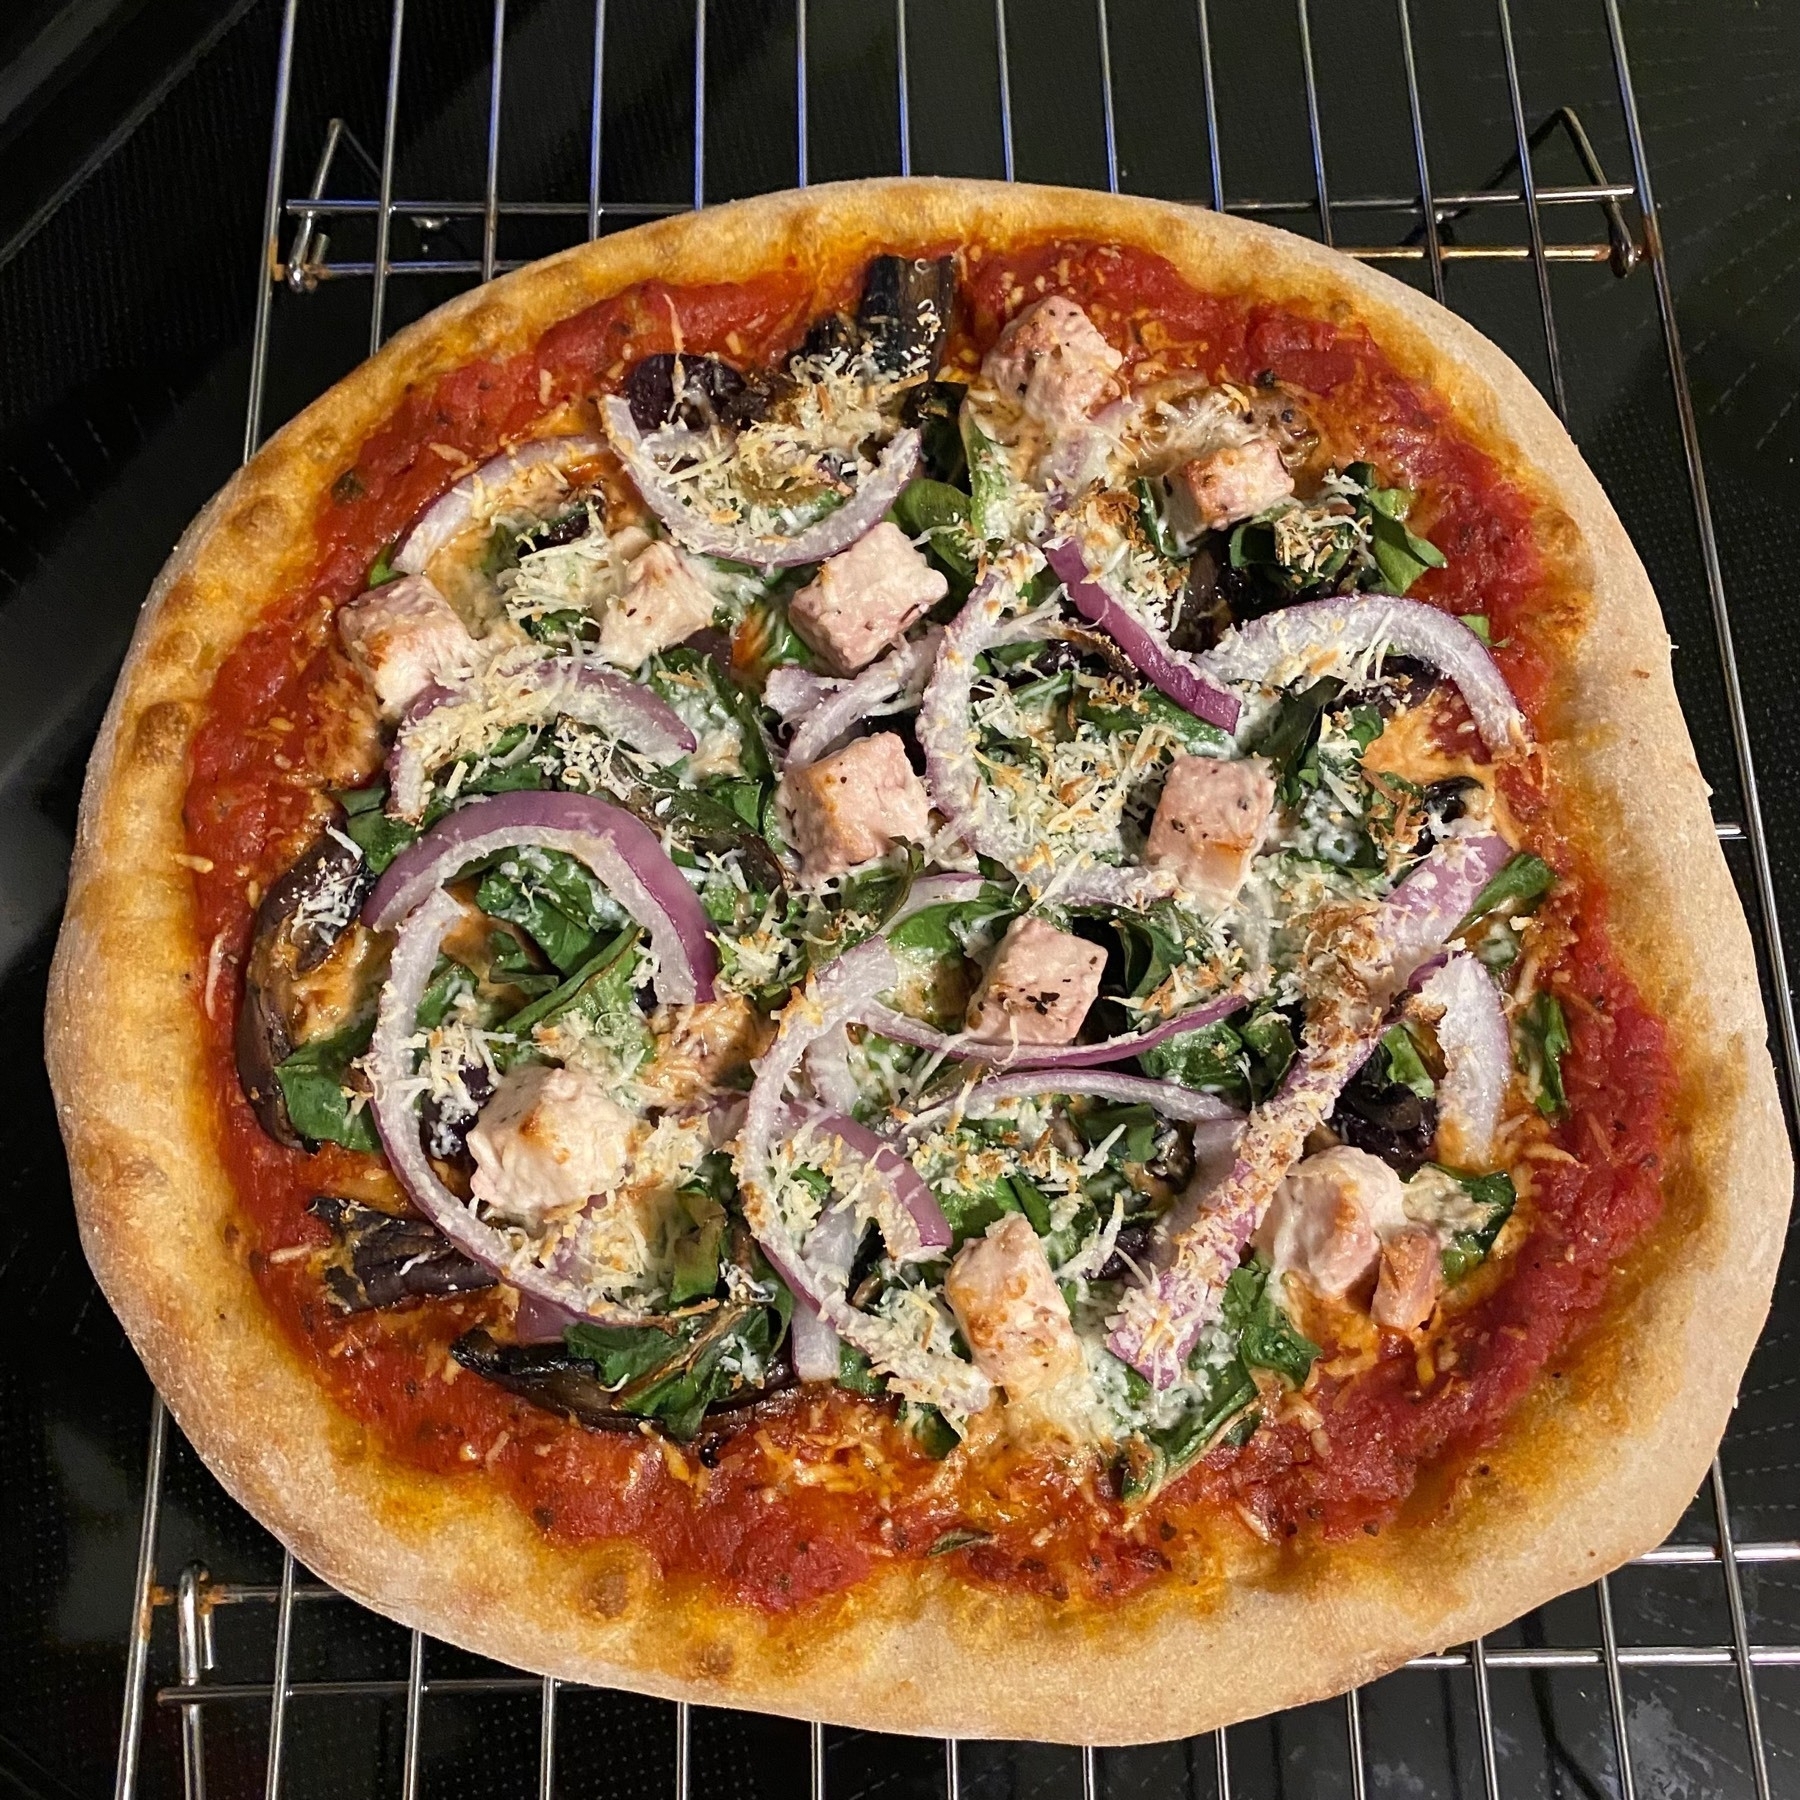 Small pizza with red onions and greens on a cooling rack.